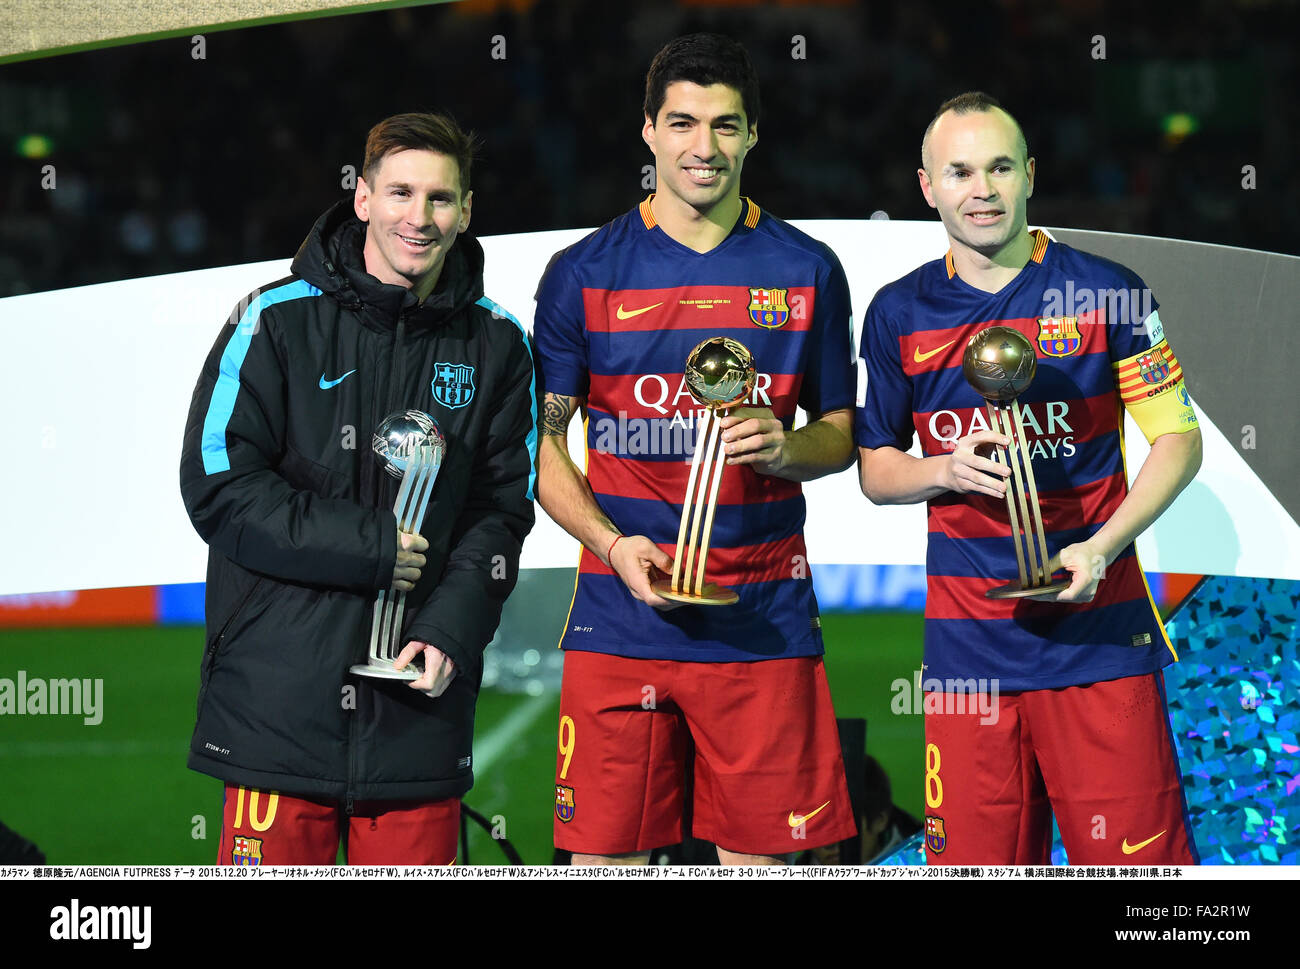 Kanagawa, Japan. 20th Dec, 2015. (L-R) Lionel Messi, Luis Suarez, Andres Iniesta (Barcelona) Football/Soccer : Golden Ball winner Luis Suarez, Silver Ball winner Lionel Messi and Bronze Ball winner Andres Iniesta, all Barcelona players, pose with their trophies after the FIFA Club World Cup Japan 2015 Final match between River Plate 0-3 FC Barcelona at International Stadium Yokohama in Kanagawa, Japan . Credit:  Takamoto Tokuhara/AFLO/Alamy Live News Stock Photo